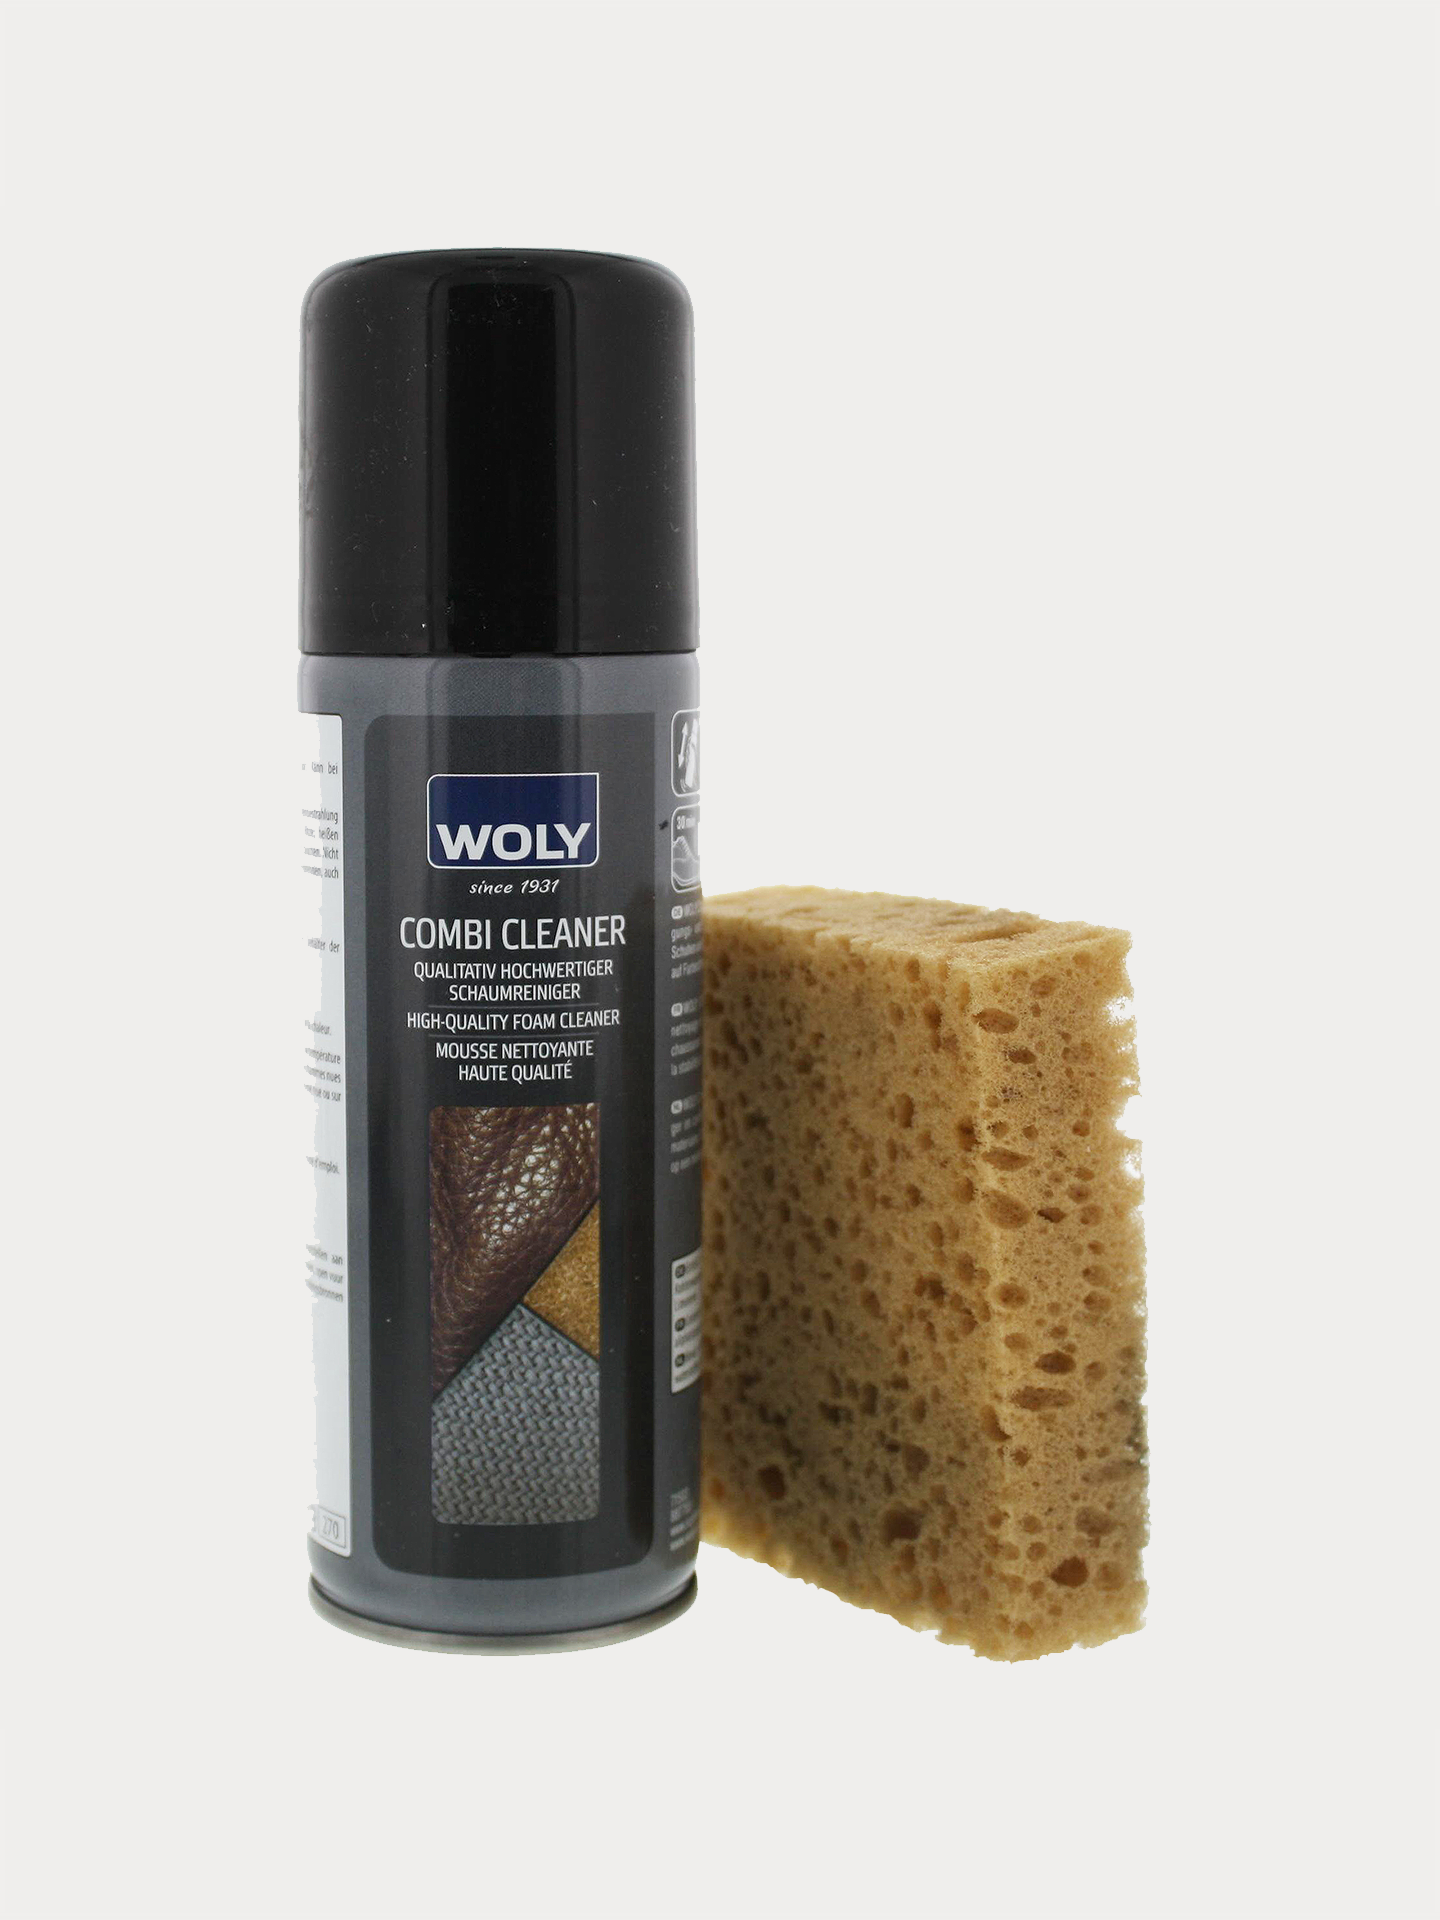 Woly Combi Cleaner Shoe Care for Neutral Leather